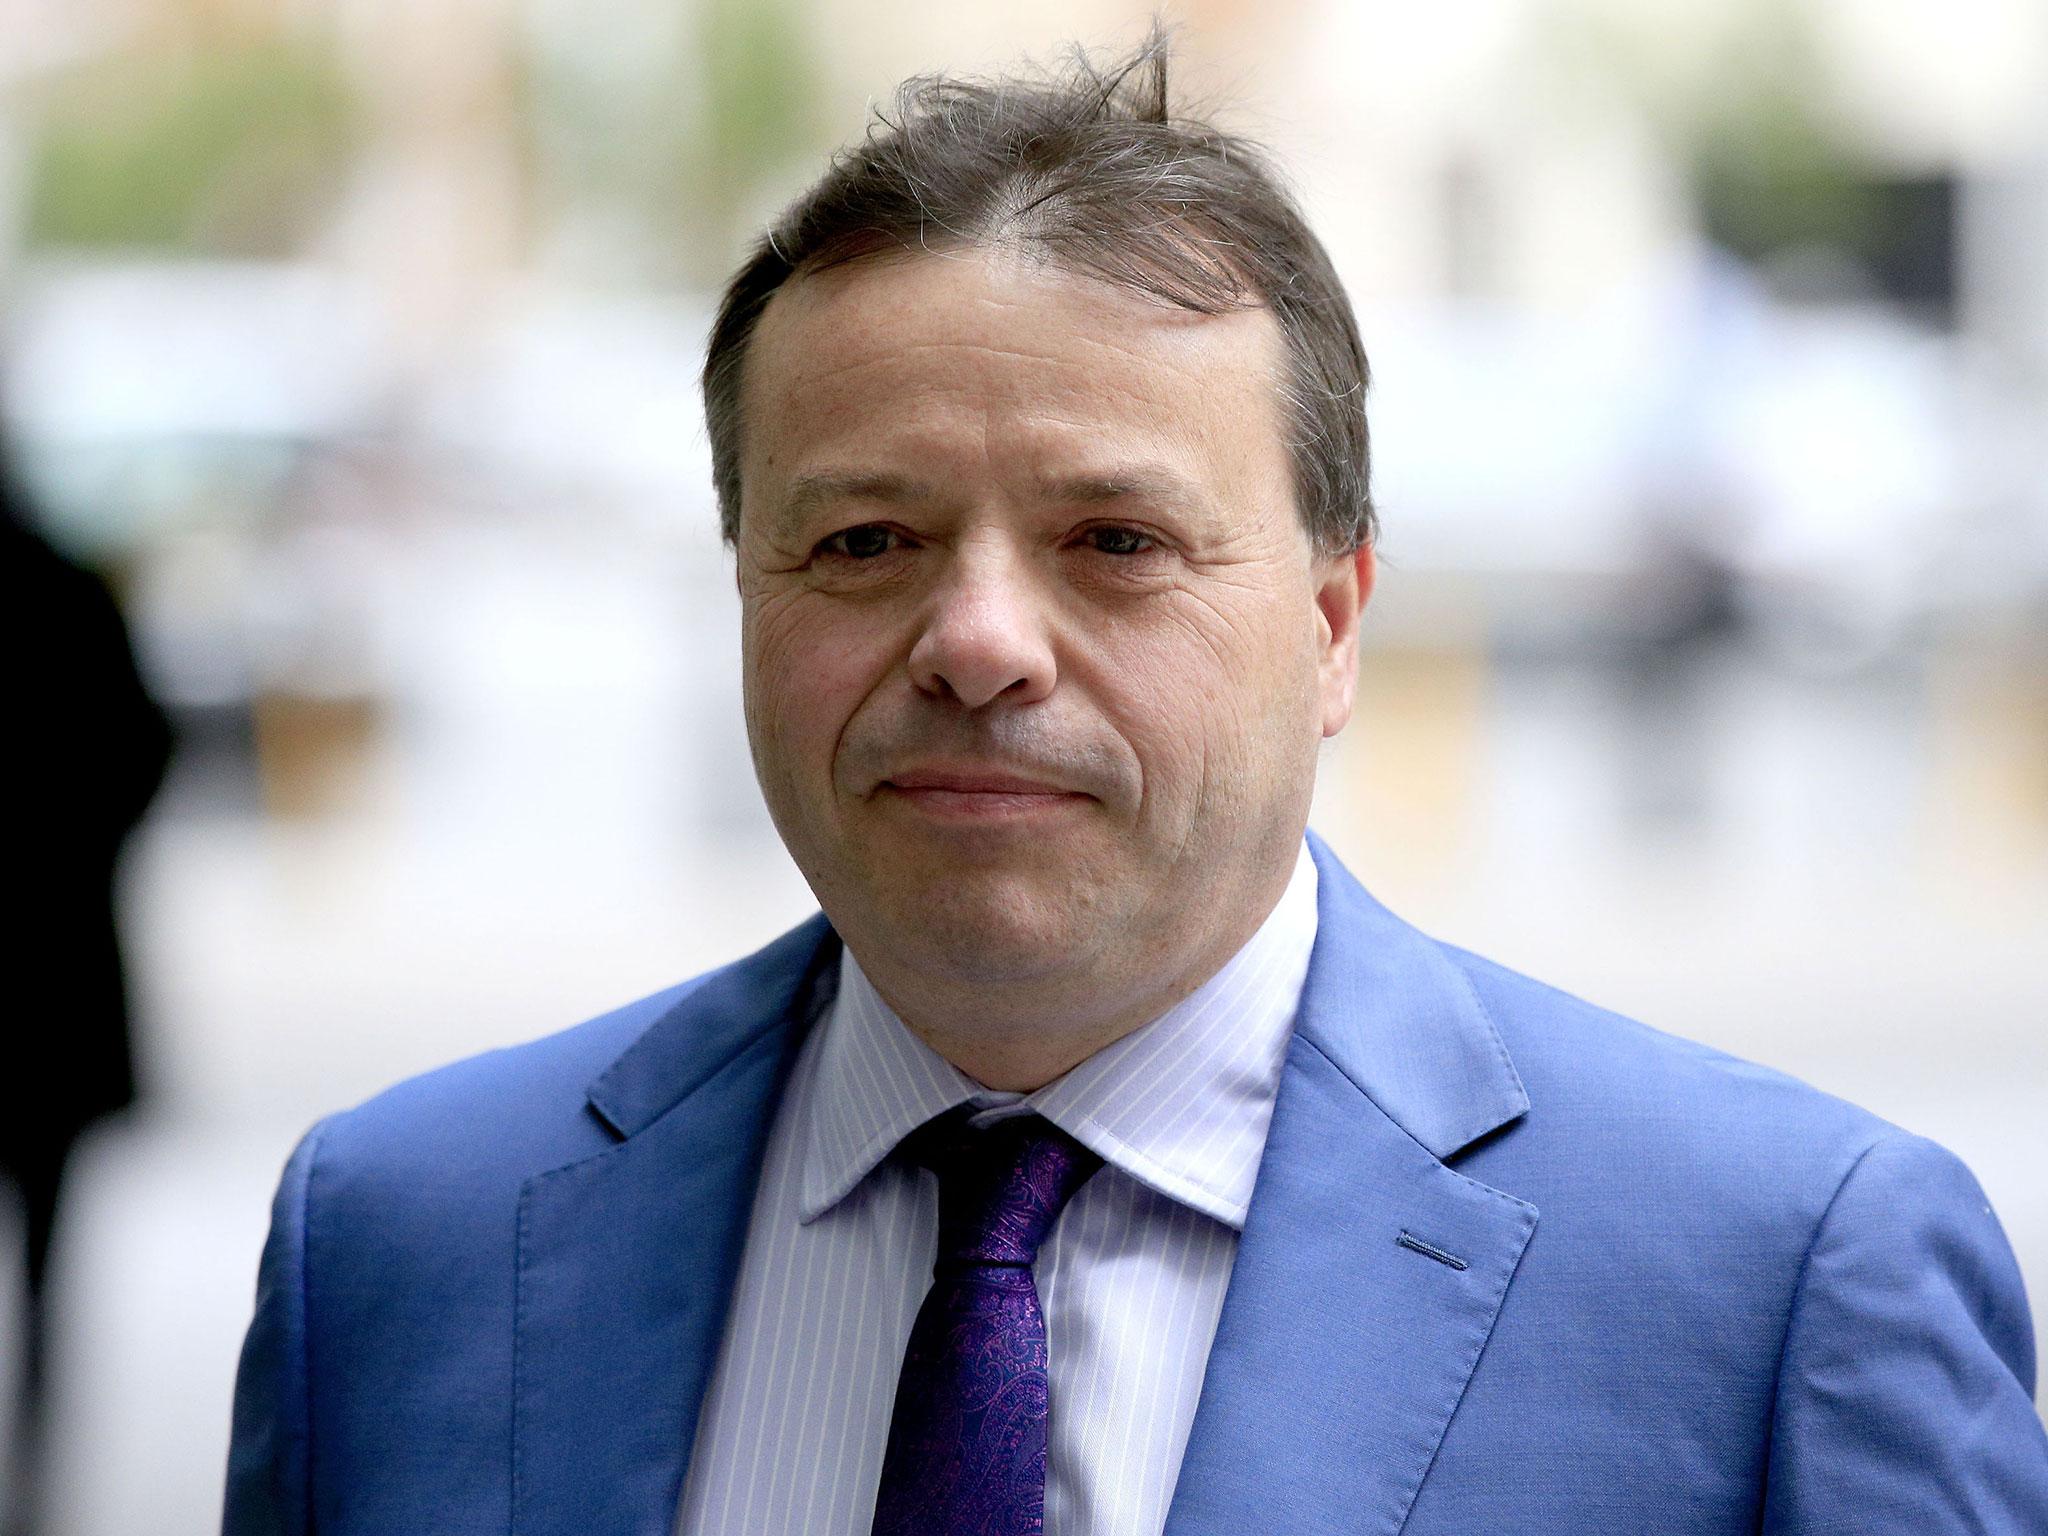 Arron Banks said Nigel Farage would have a 'more fulsome role' in the party under his stewardship